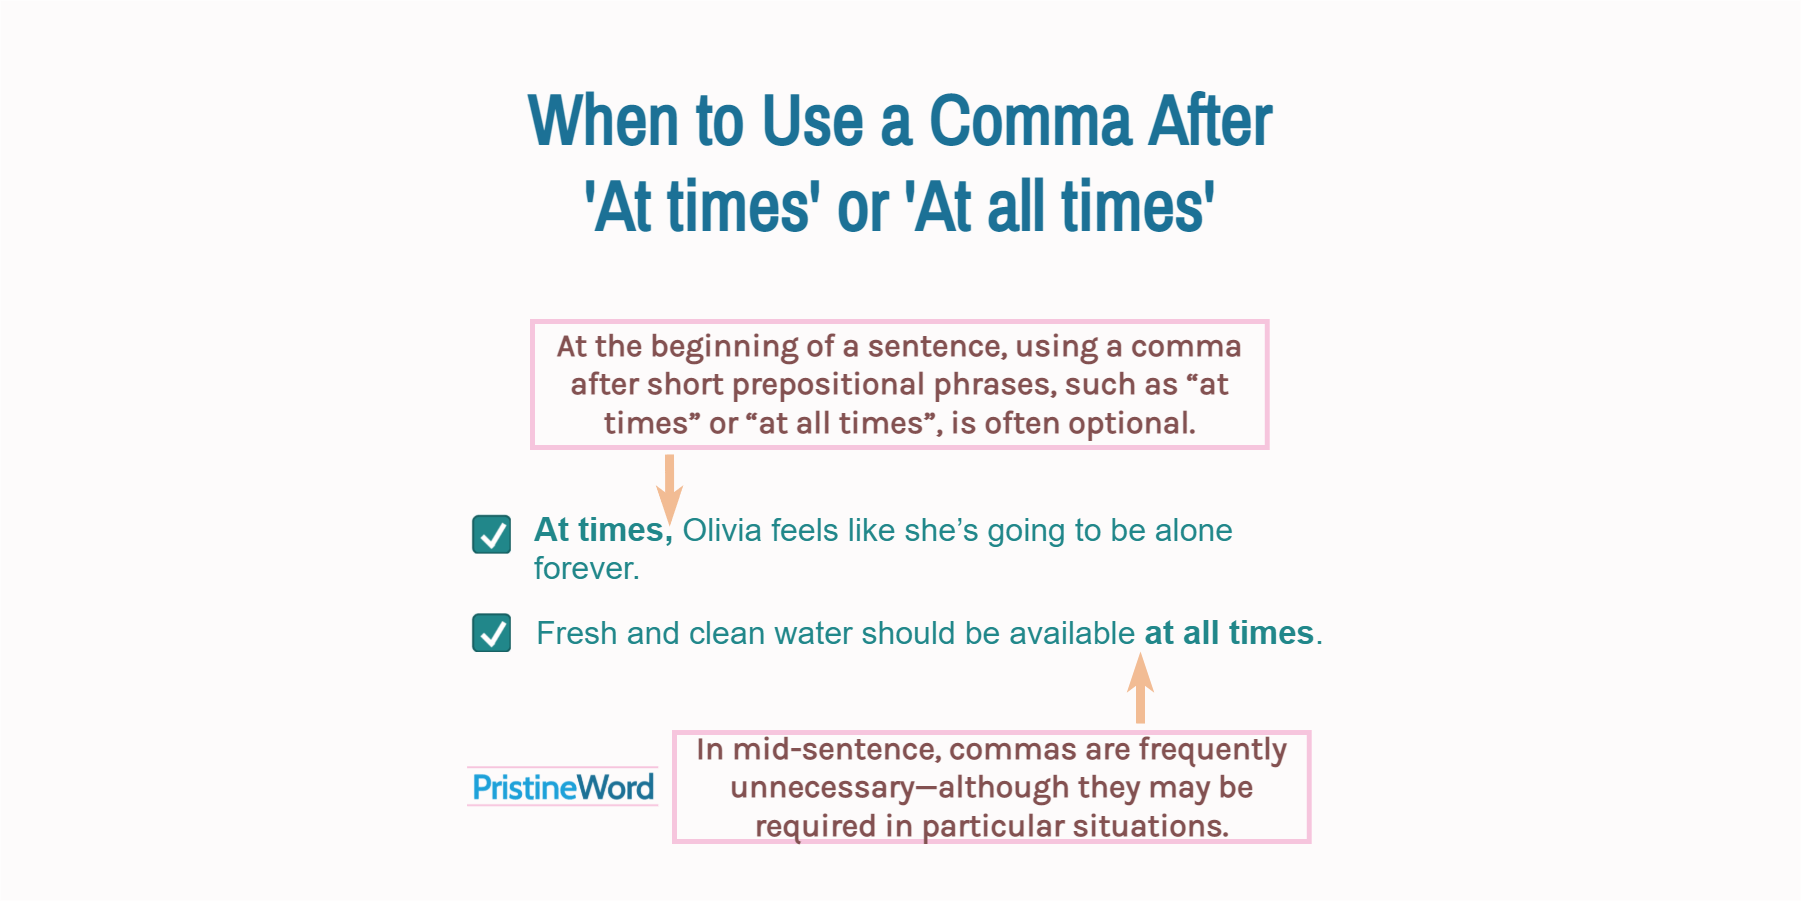 When to Add a Comma After 'At times' or 'At all times'